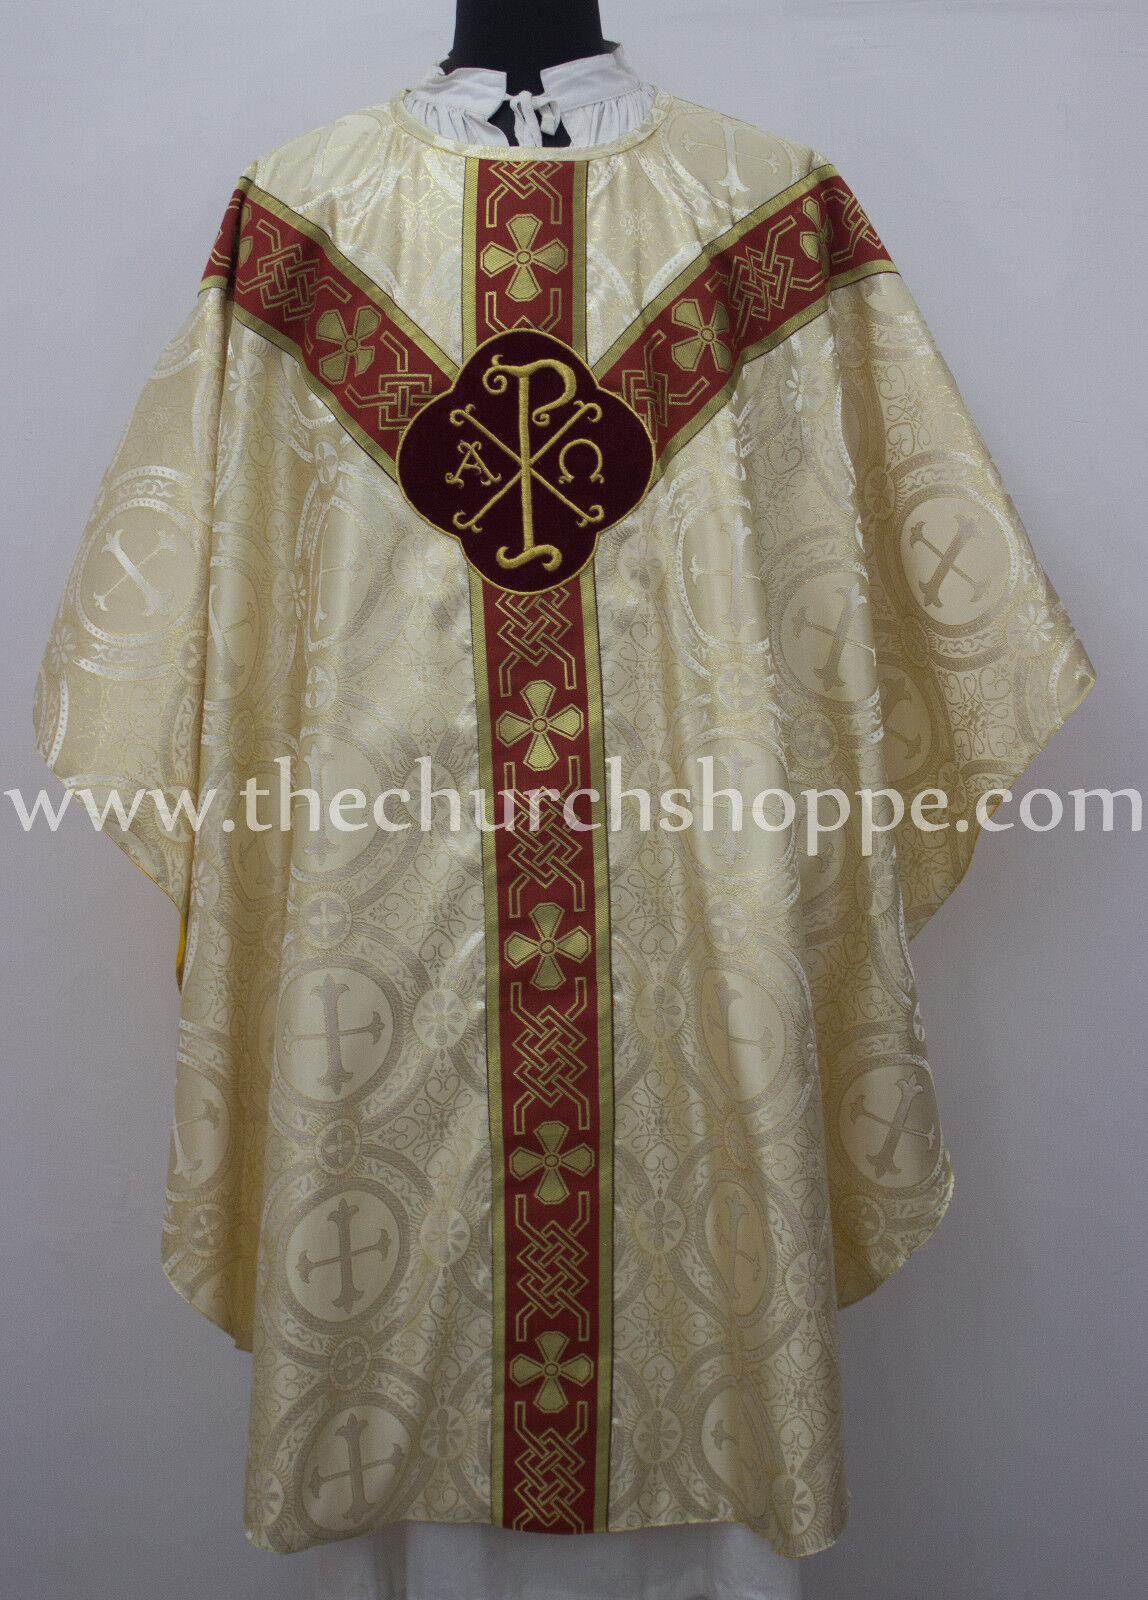 New Metallic Gold gothic vestment & mass and stole set ,Gothic chasuble ,casula 